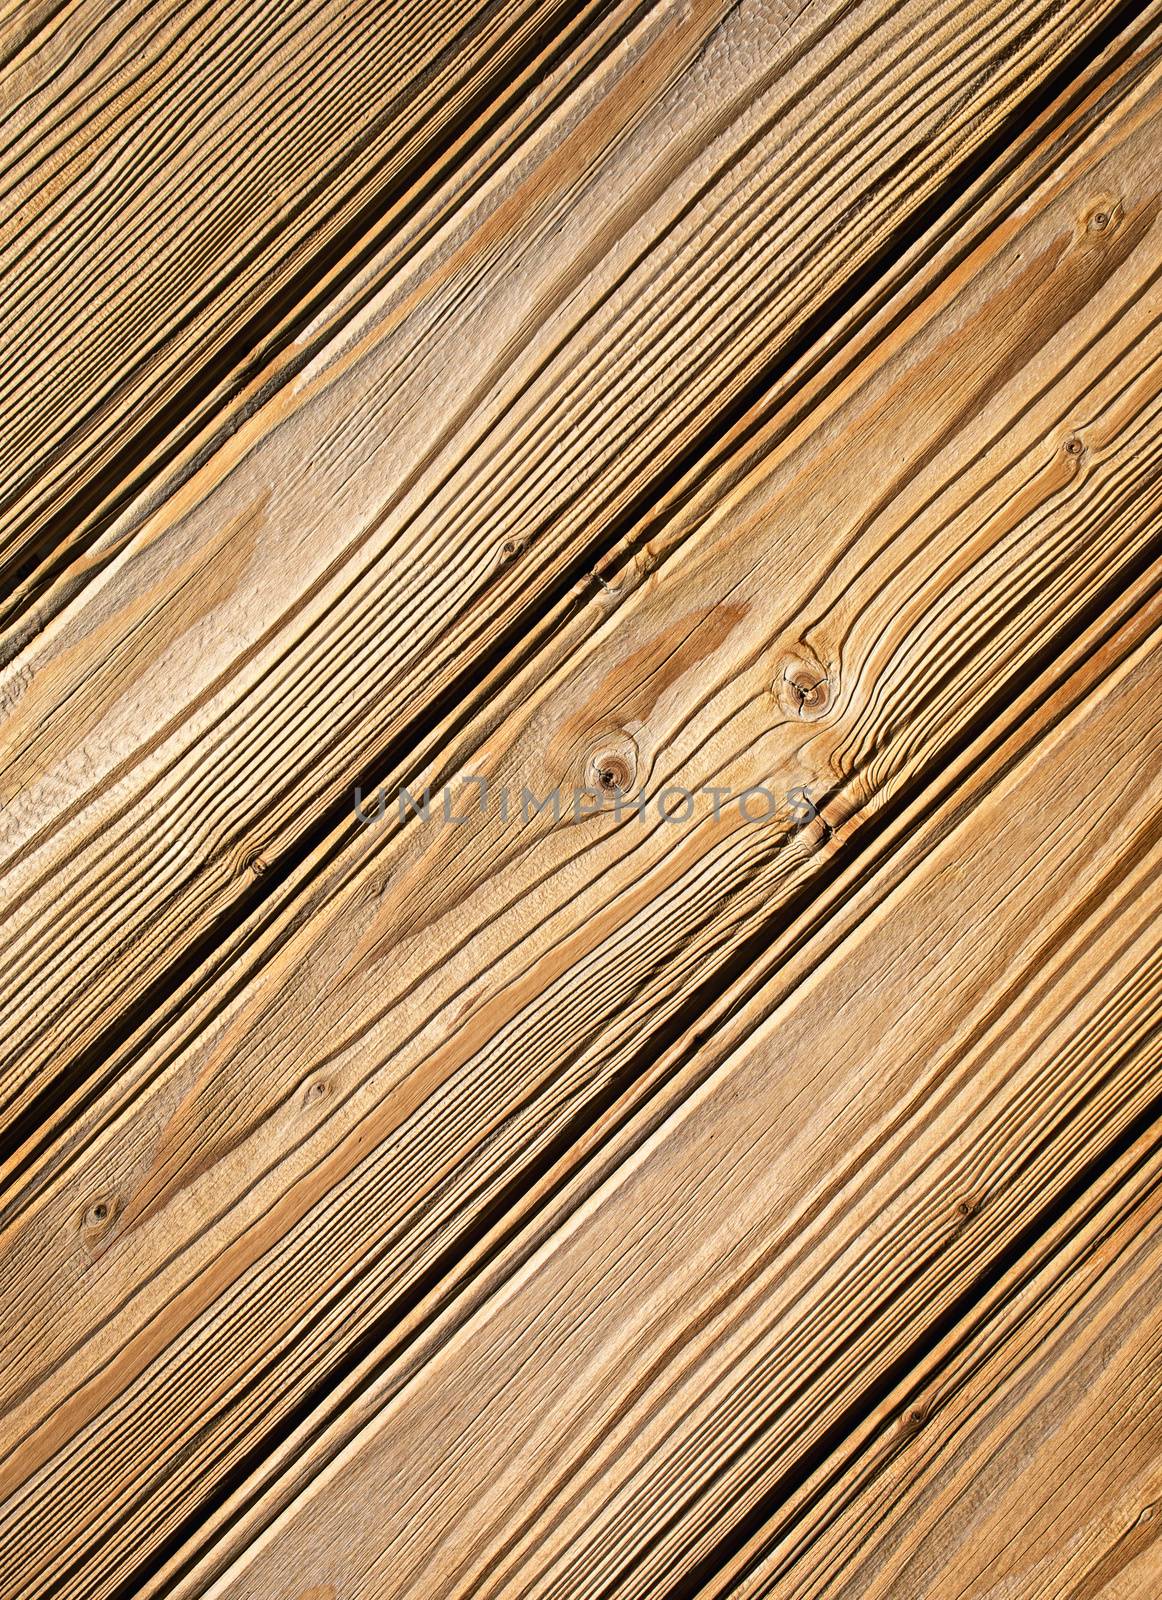 detail on wooden siding with grooved boards by Ahojdoma